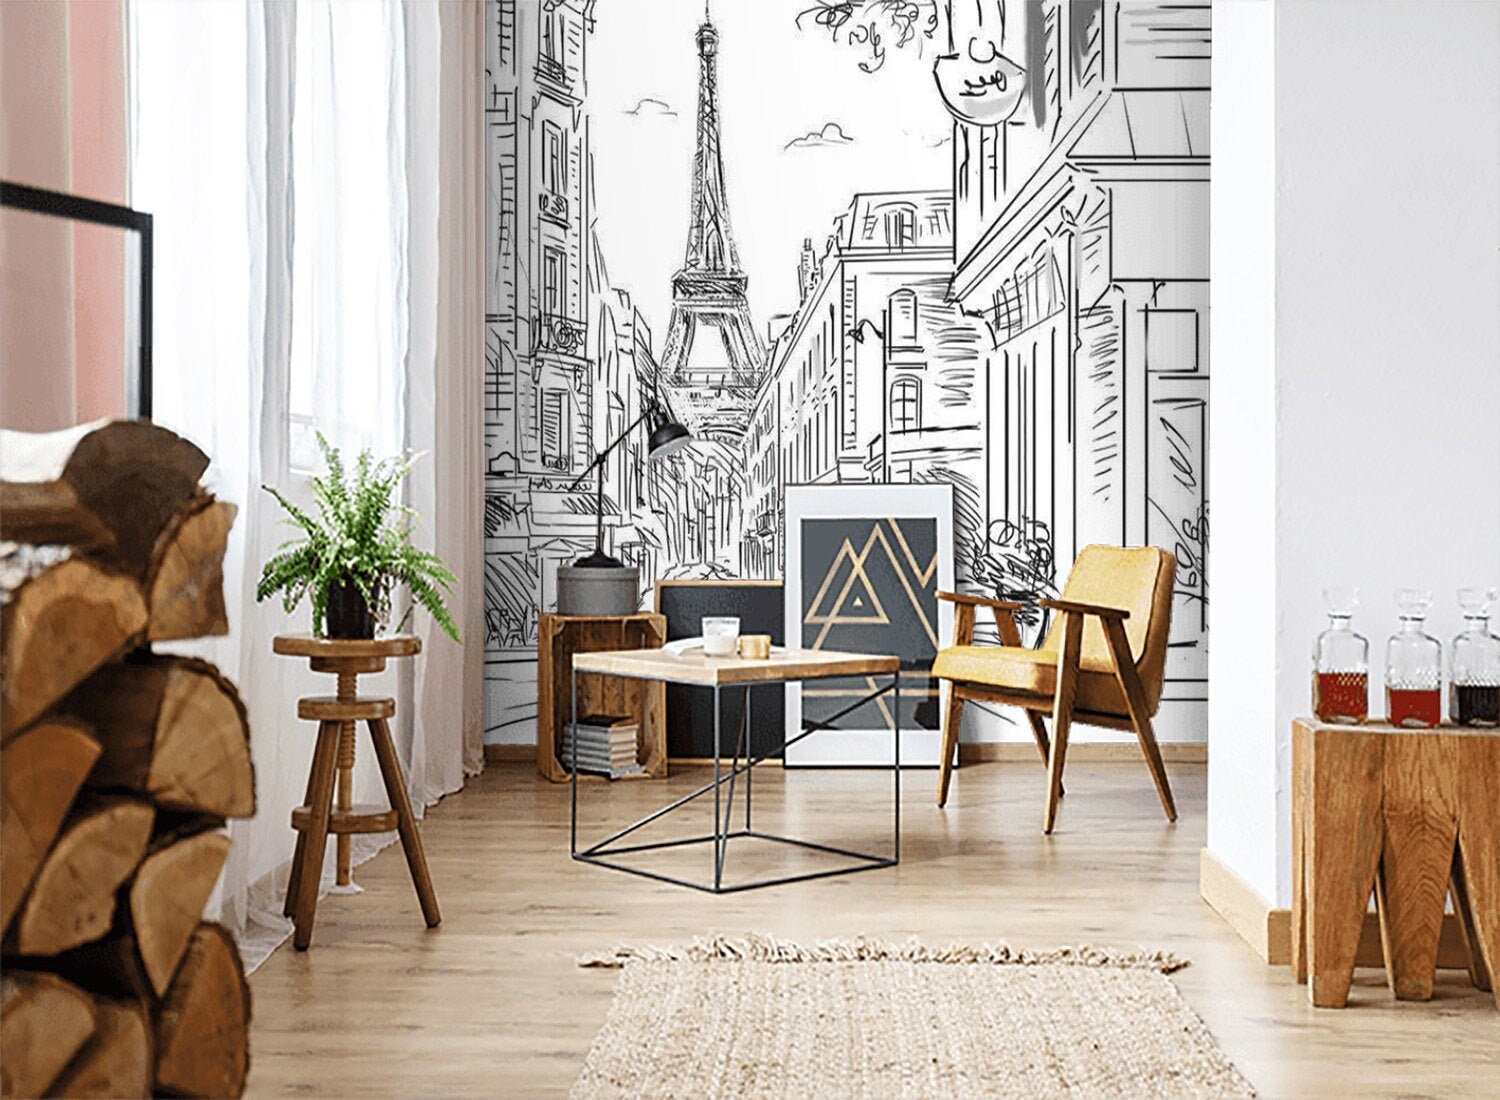 Seine River Paris Iron Tower Scenery Wall Sticker Living Room Bedroom  Office Decoration Landscape Mural Art Diy Pvc Home Decal